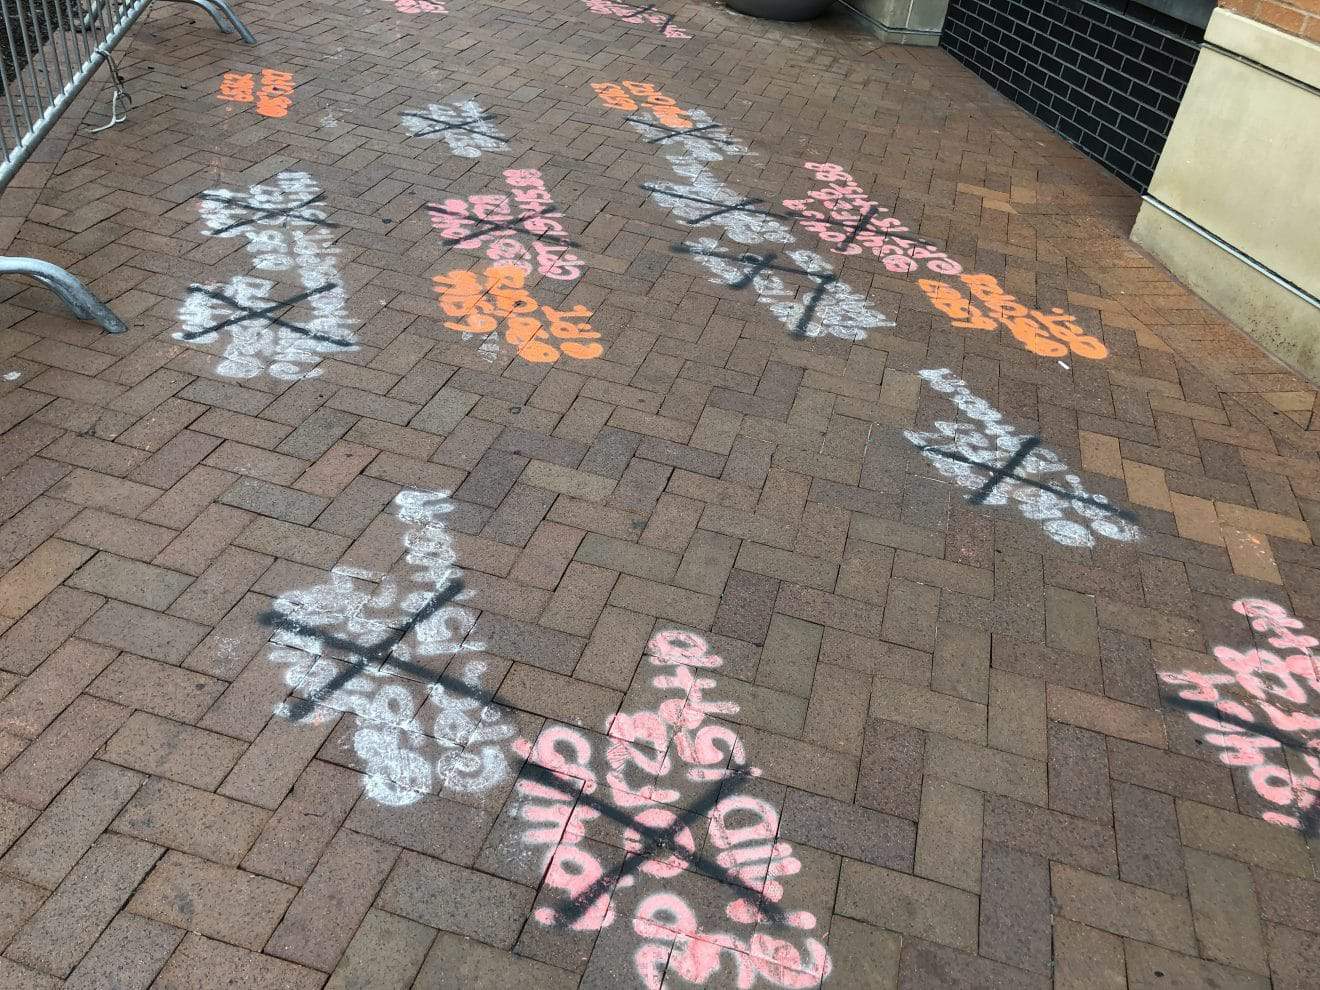 Mystery Sidewalk Markings Related to Pepco Project